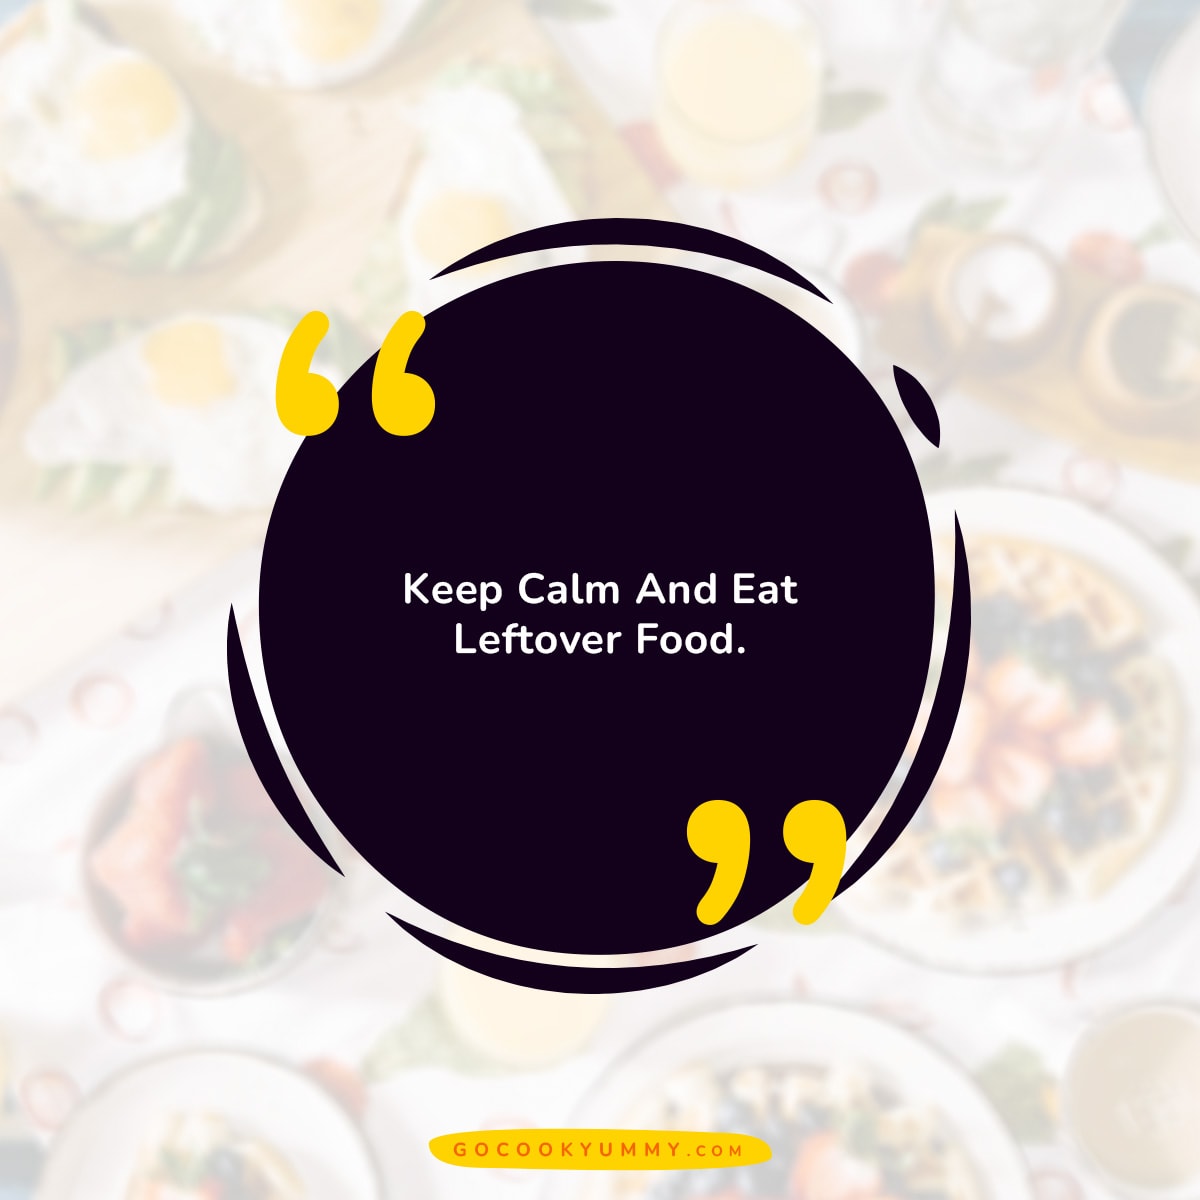 Keep calm and eat leftover food.